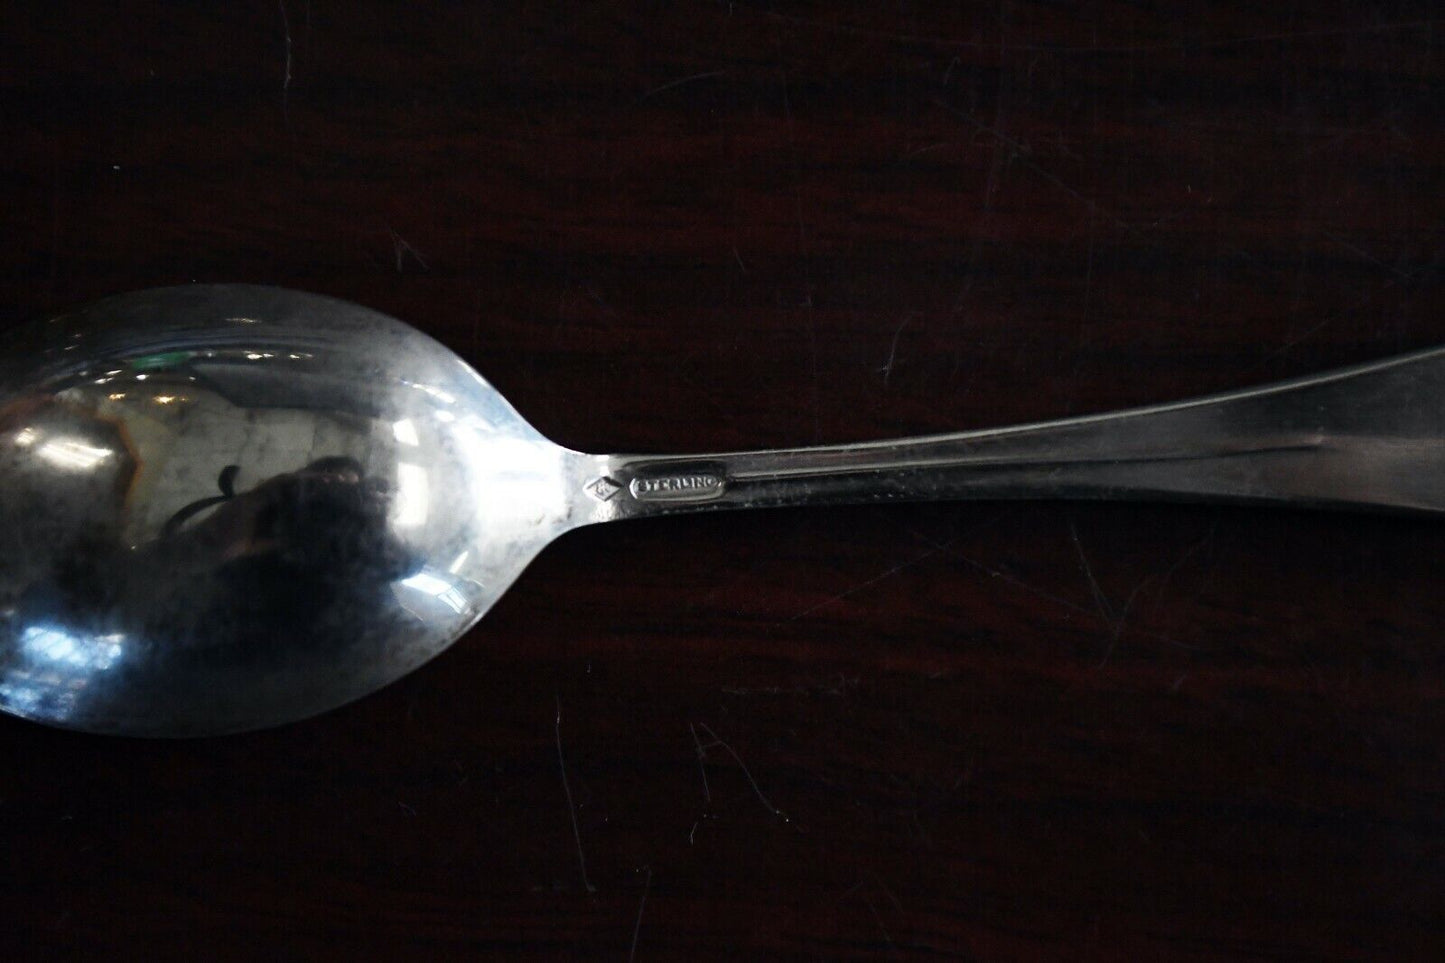 Chicago Illinois Sterling Silver .33 oz. Souvenir Spoon 4 1/4" Water Tower